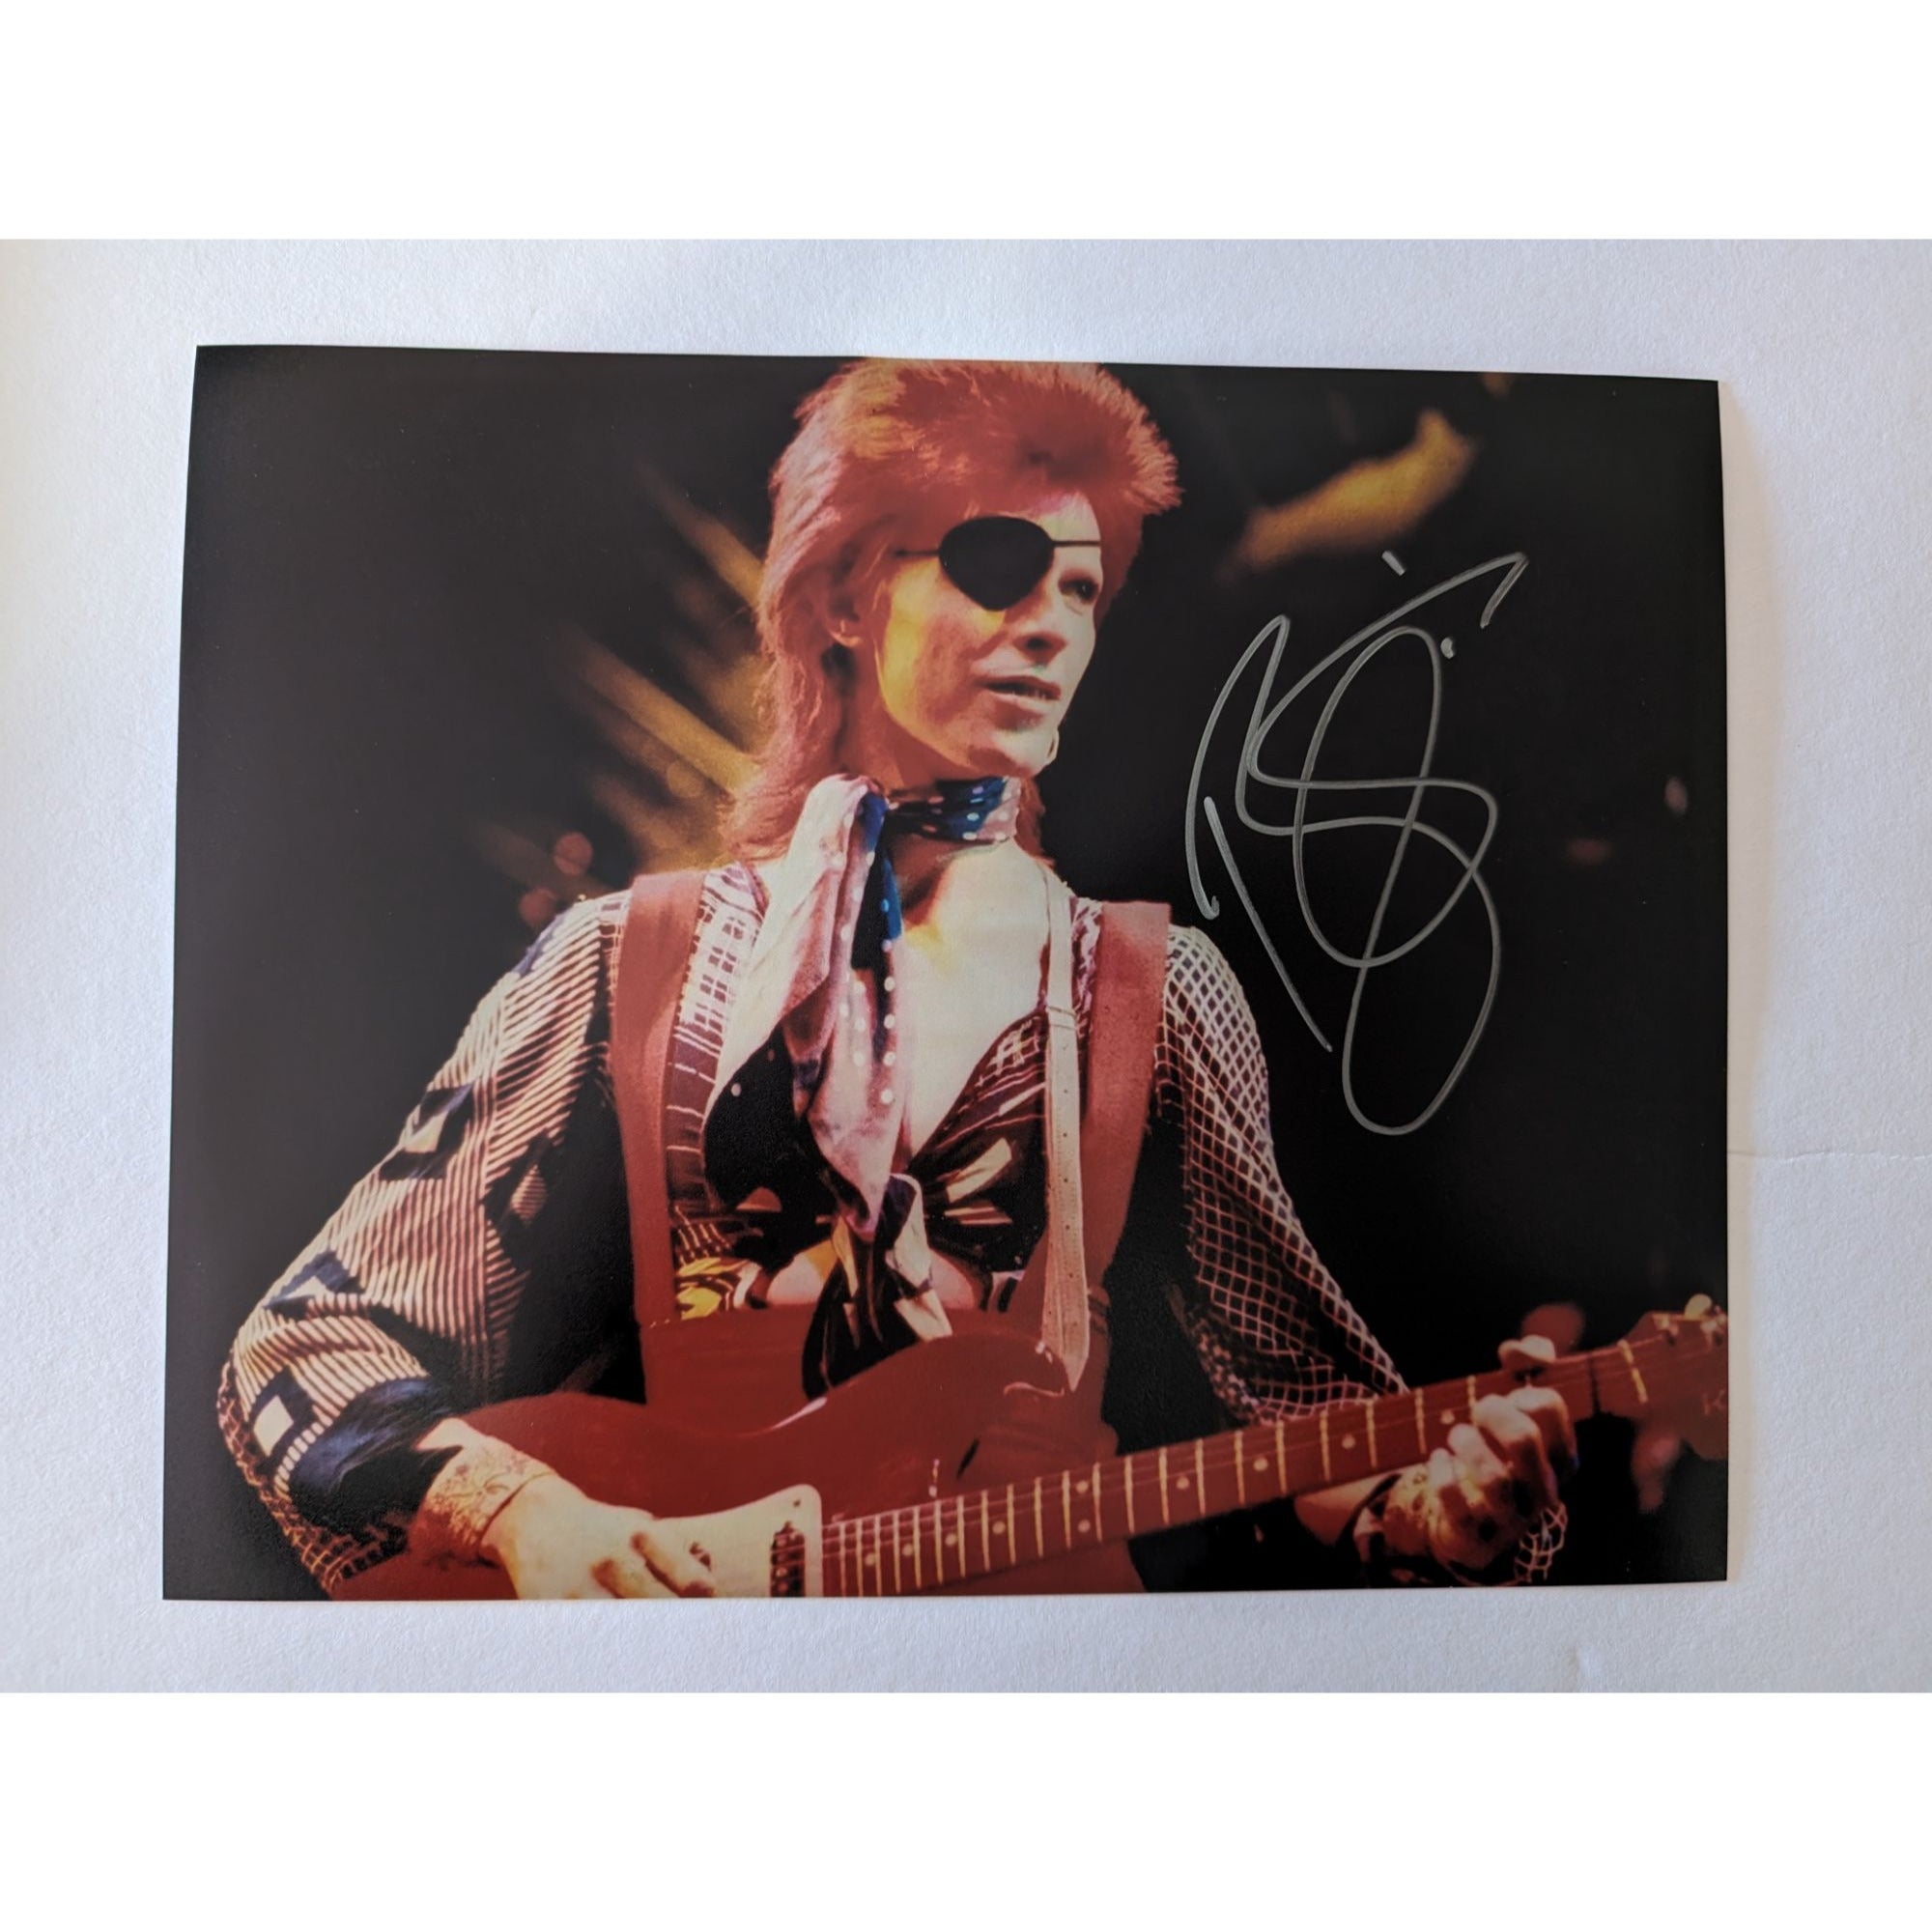 David Bowie hand signed original authentic 8x10 photo signed with proof